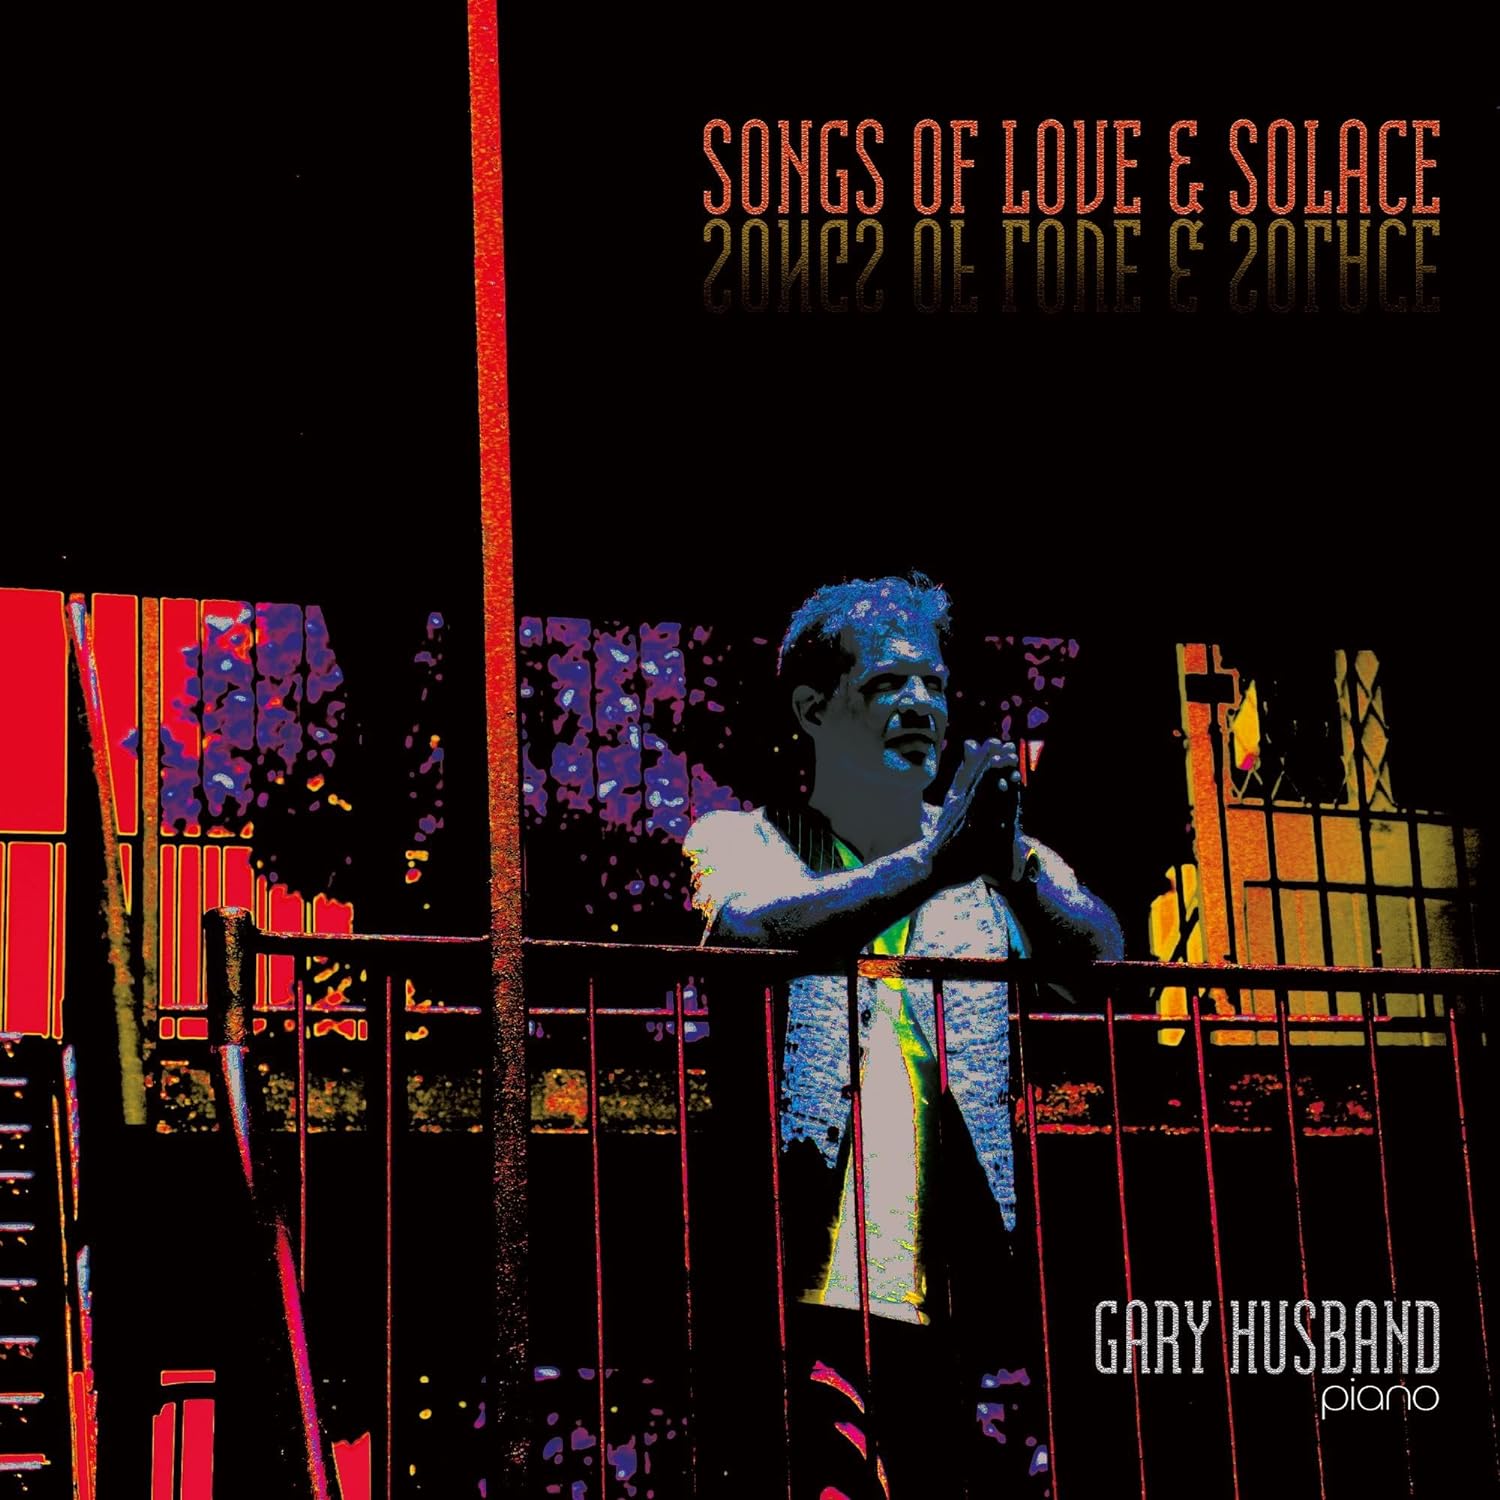 GARY HUSBAND - Songs of Love & Solace cover 